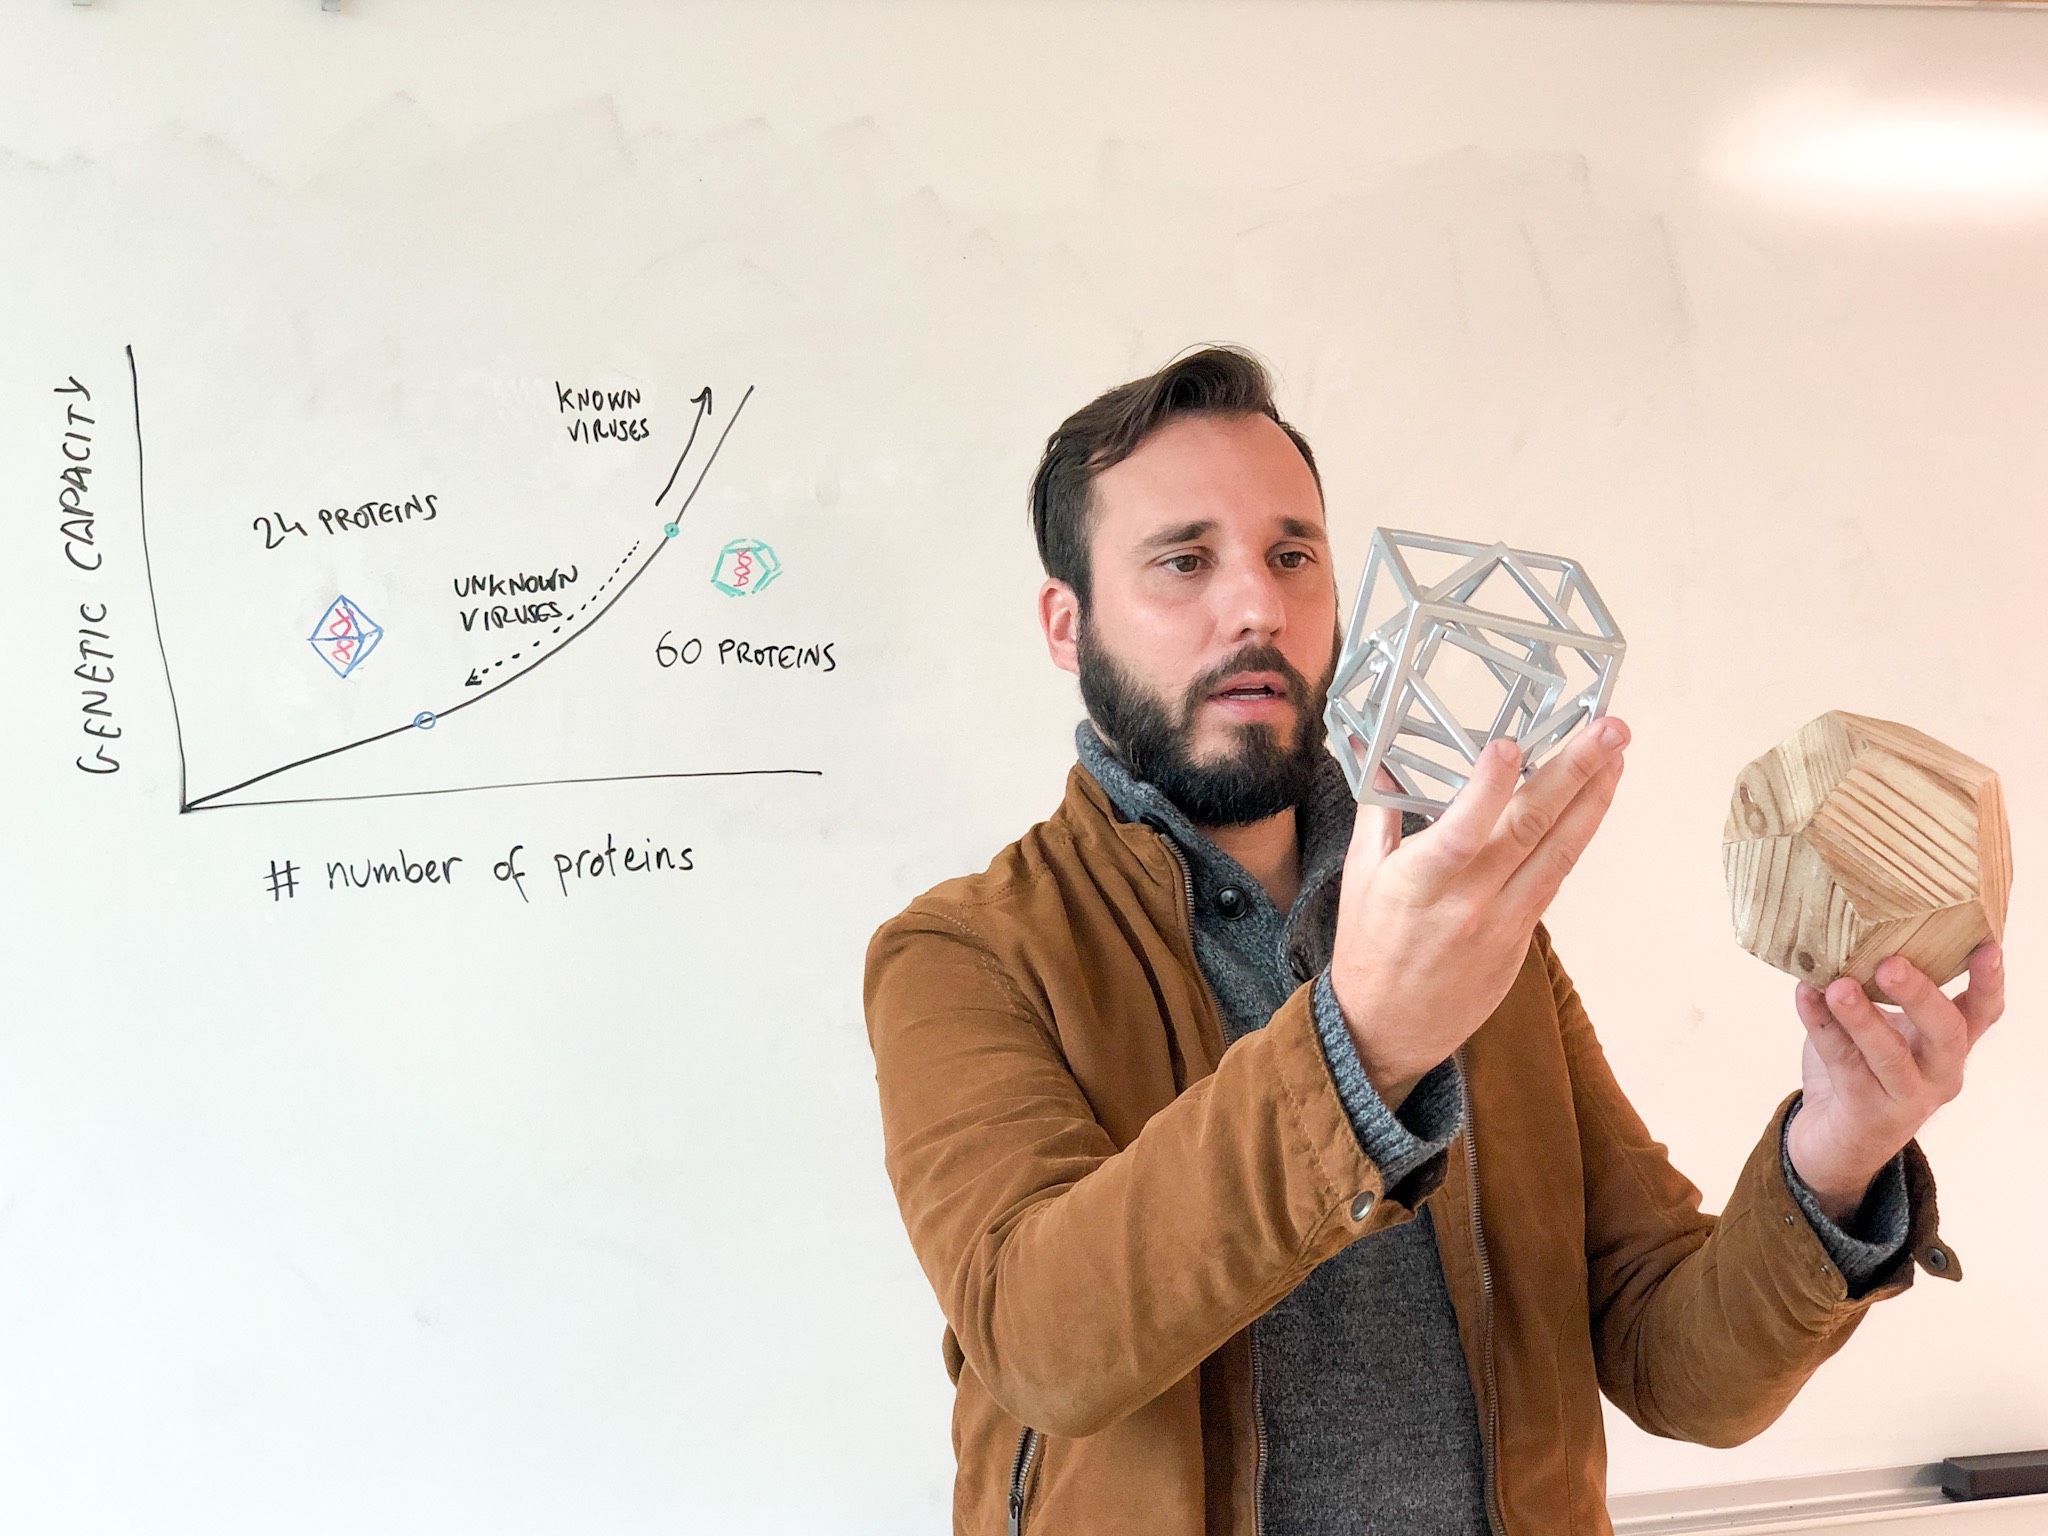 A man with brown hair and a beard holds two mathematical models of virus capsids, one of metal and one of wood, in front of a whiteboard. He is wearing a brown jacket and grey sweater.